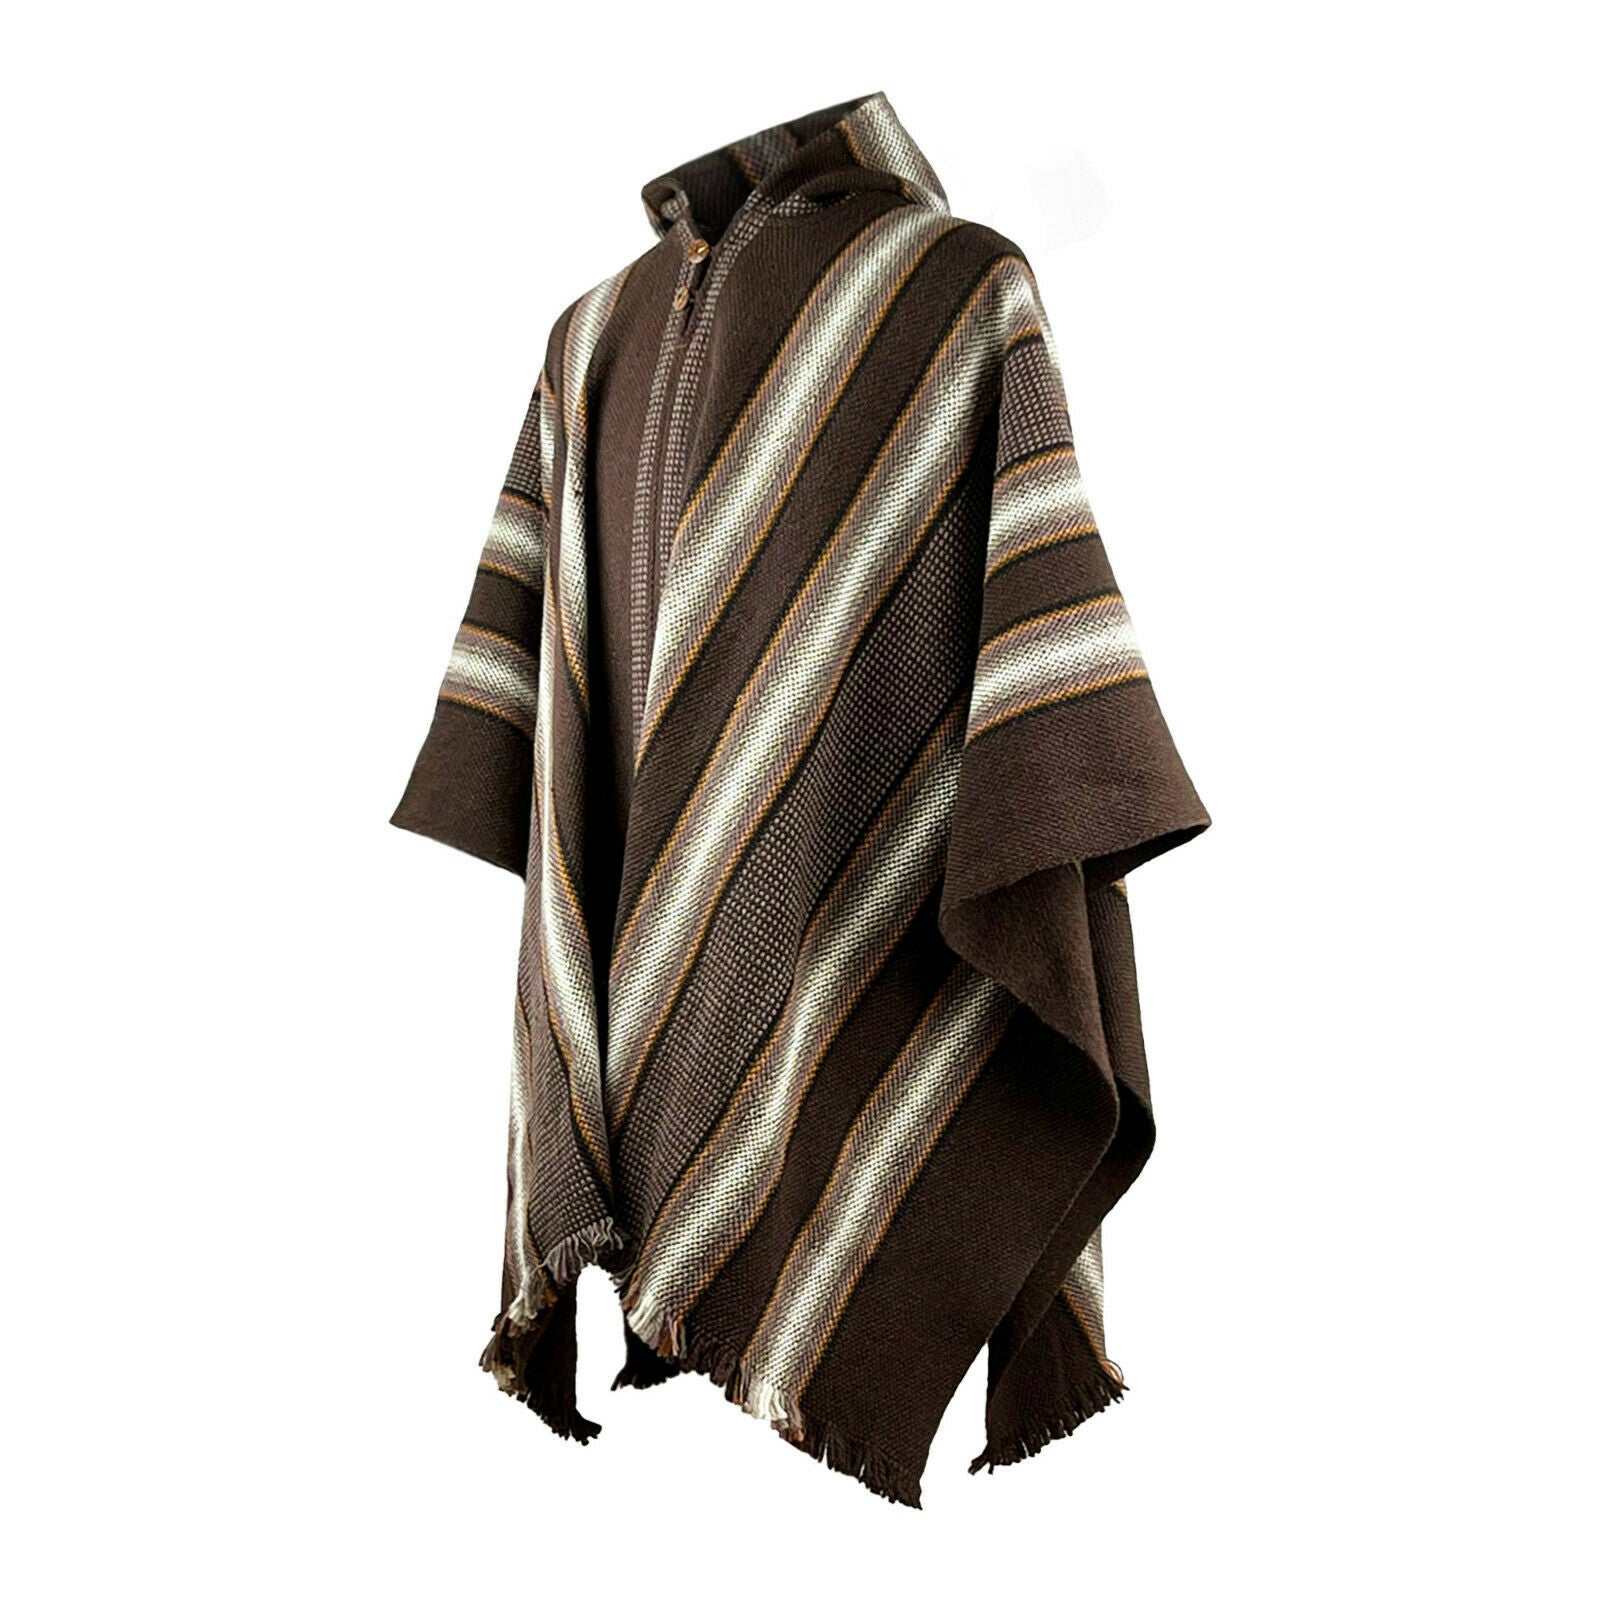 Llama Wool Unisex South American Handwoven Hooded Thick Poncho gray ...